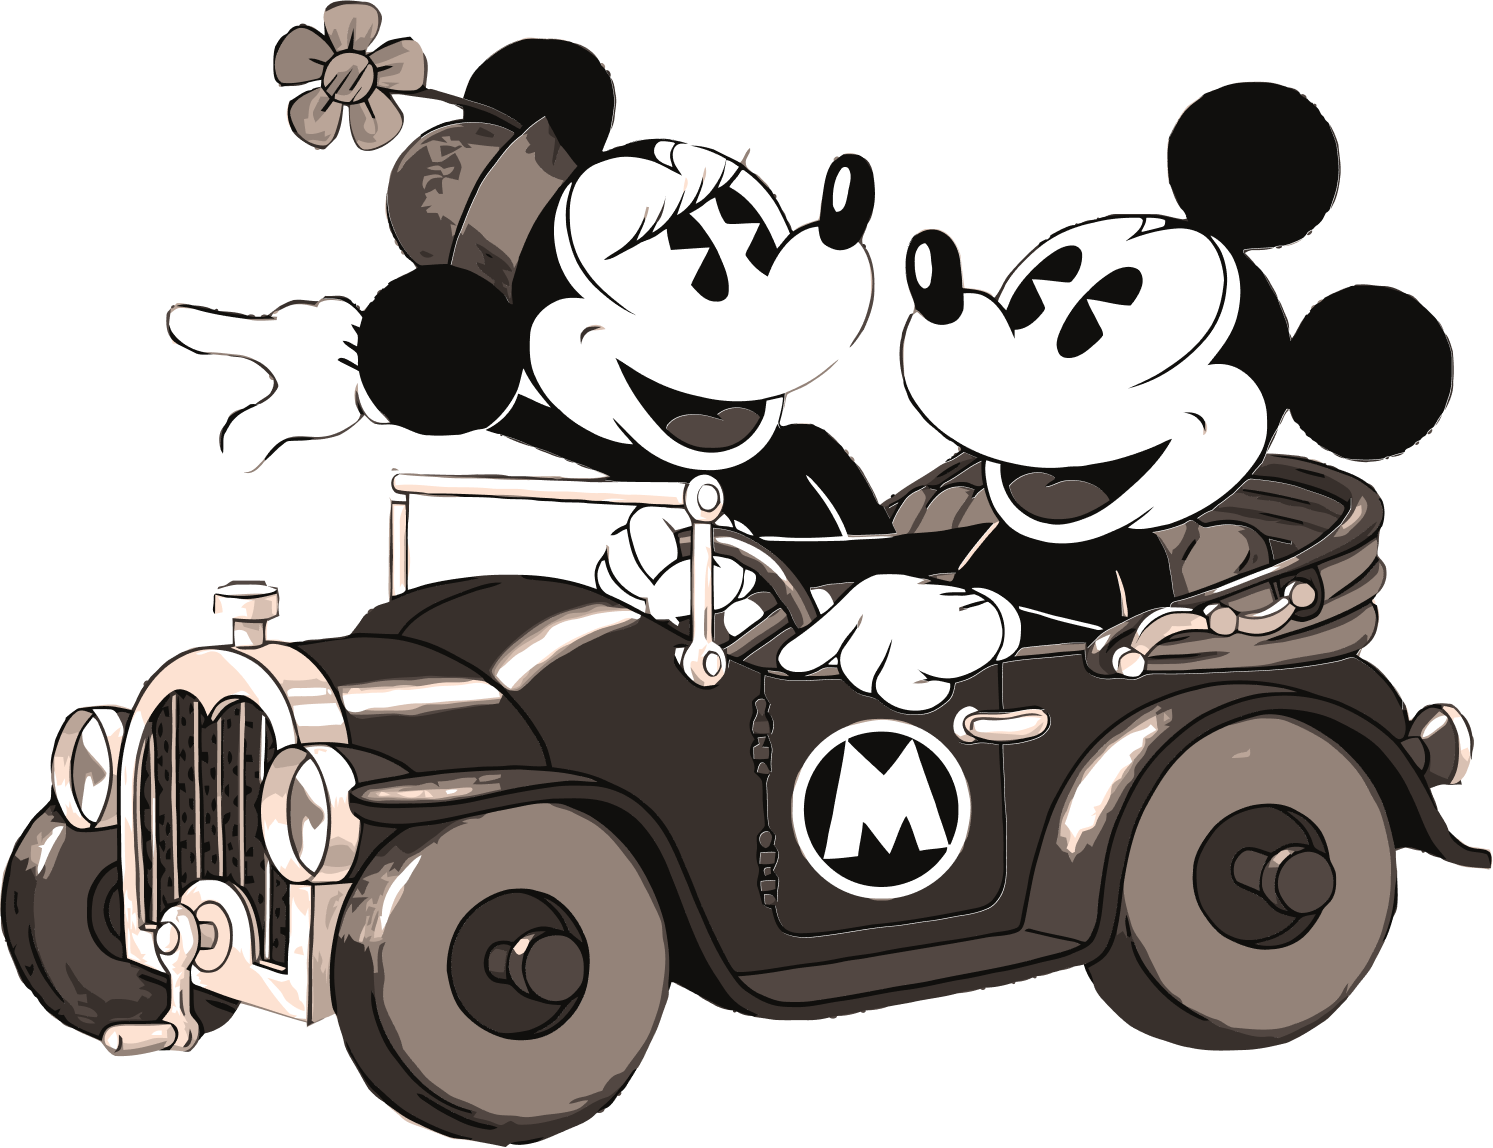 Adorable picture of Mickey Mouse and Minnie Mouse.